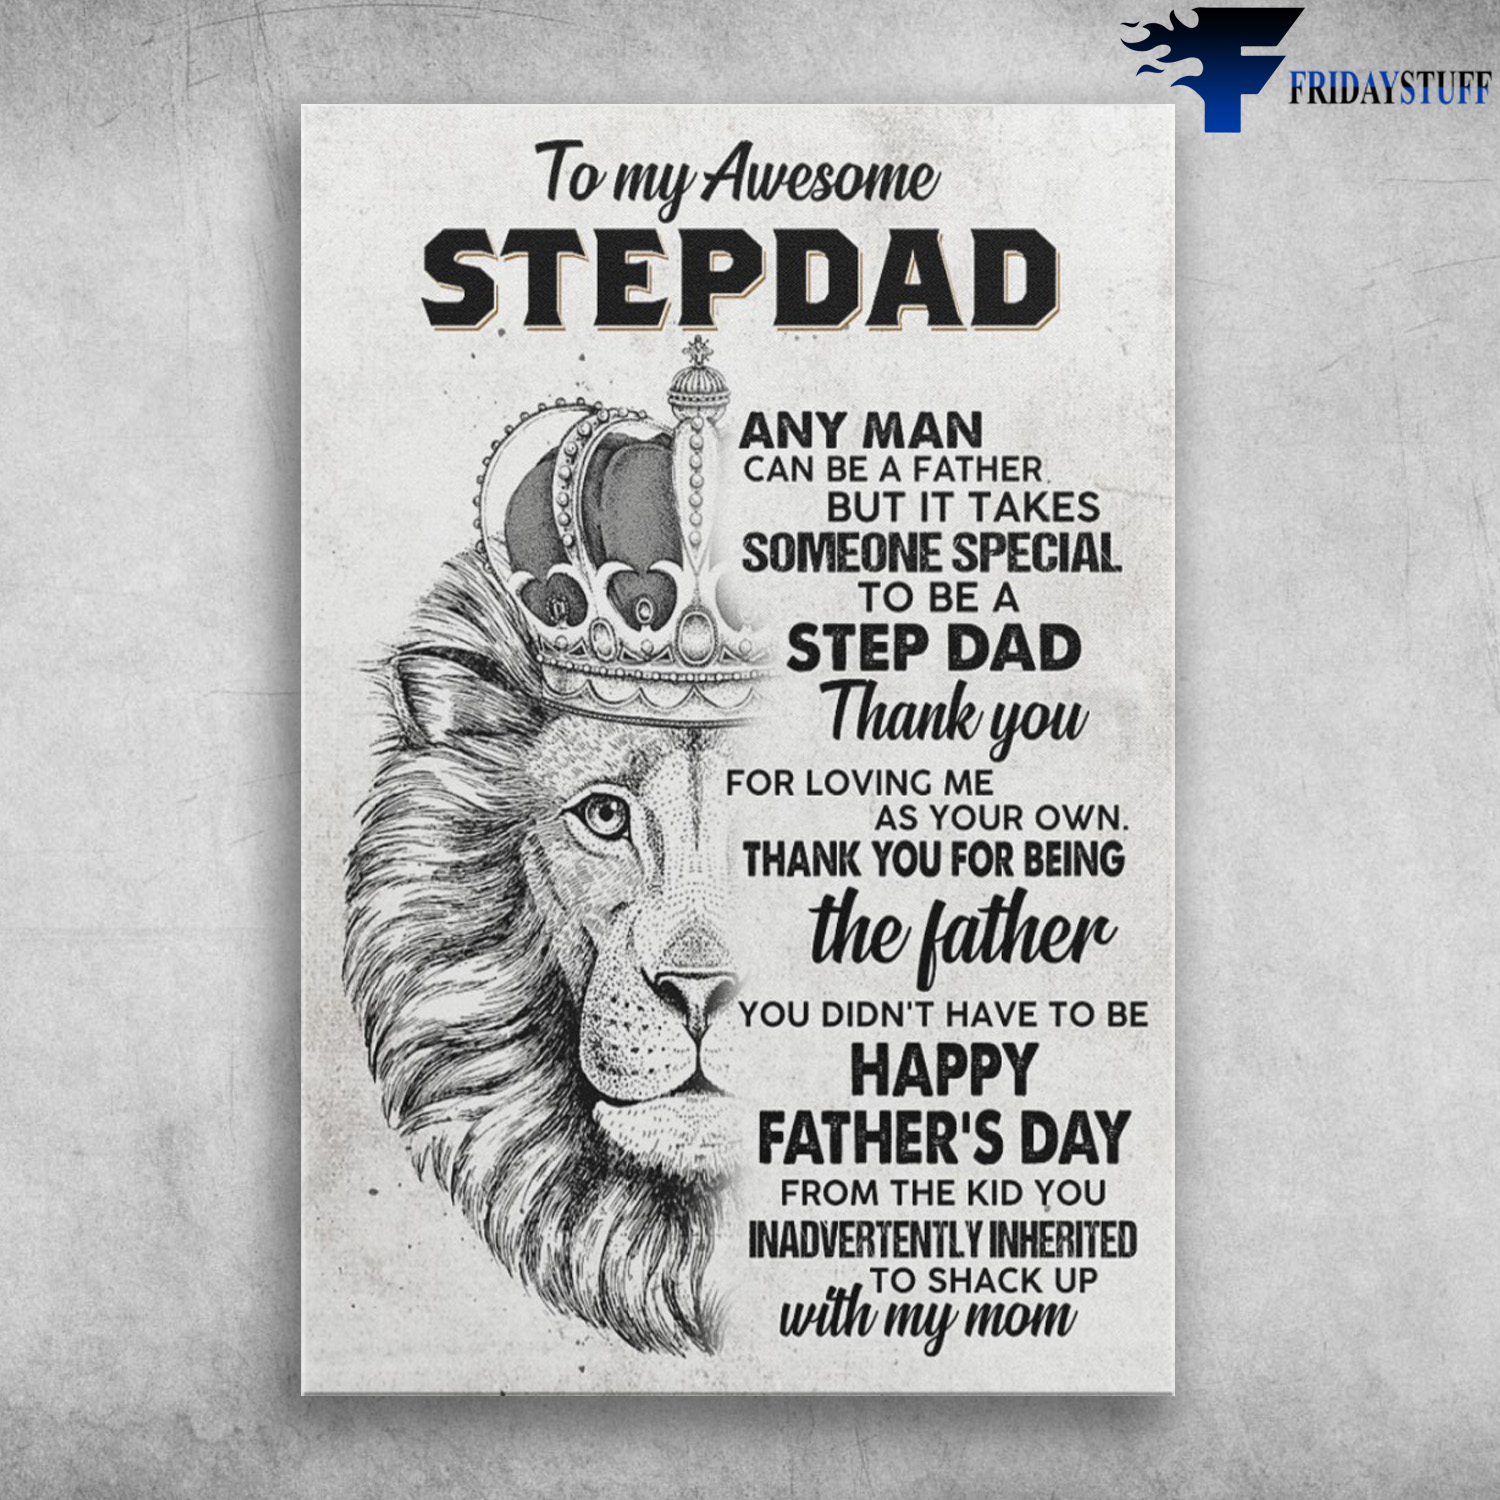 Lion King - To My Awesome Stepdad, Any Man Can Be Father, But It Takes Someone Special, To Be A Step Dad, Thank You For Loving Me, As Your Own, Thank You For Being The Father, You Didn't Have To Be Happy, Father's Day